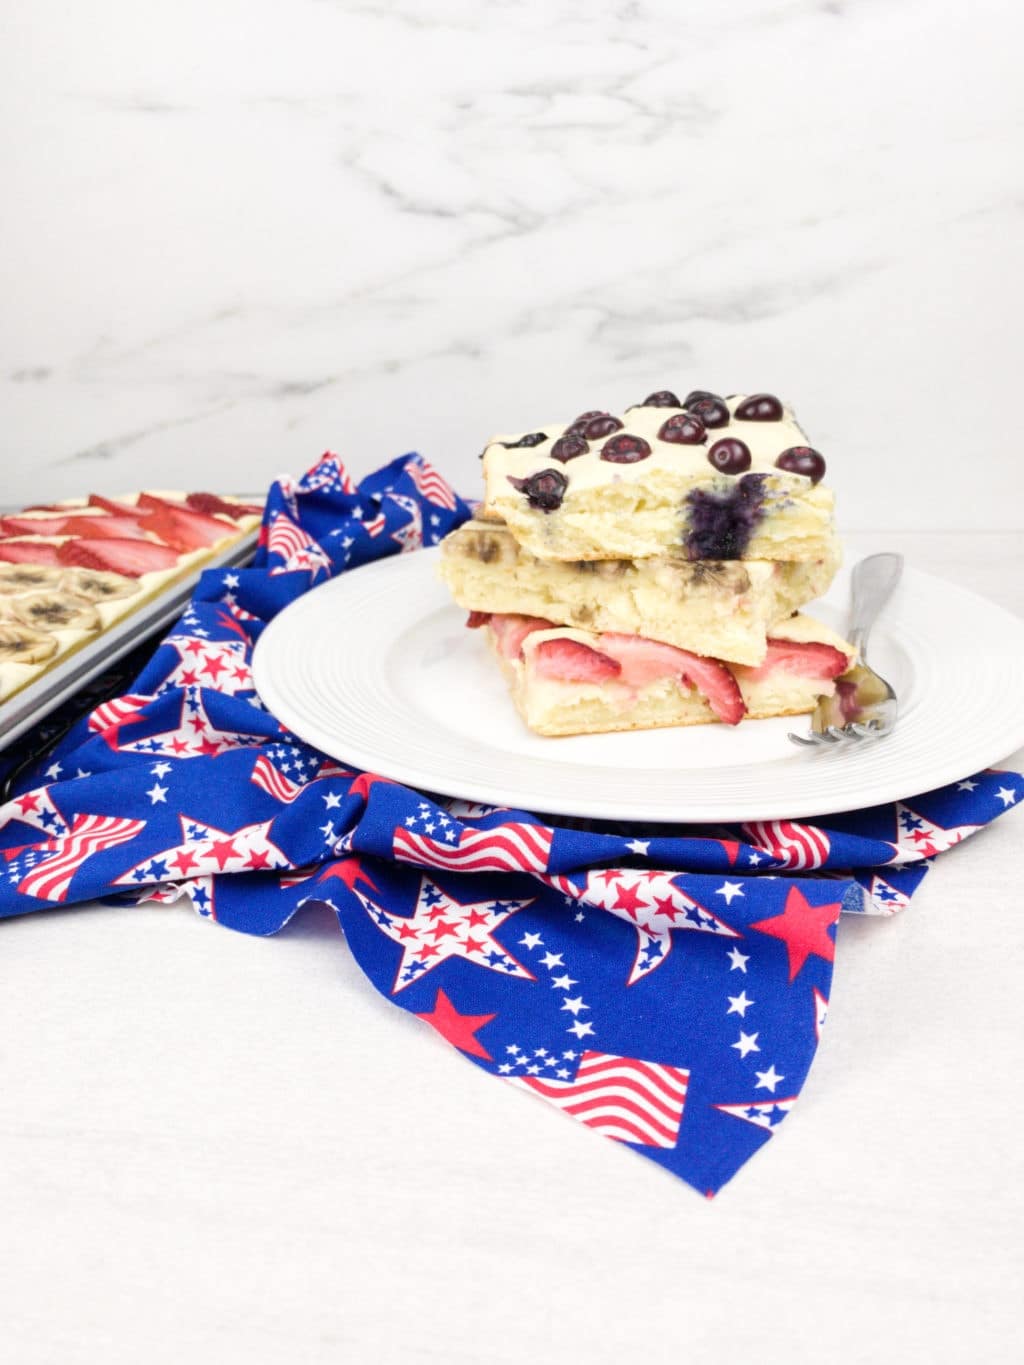 Delicious looking 4th of July sheet pan pancakes with fruit